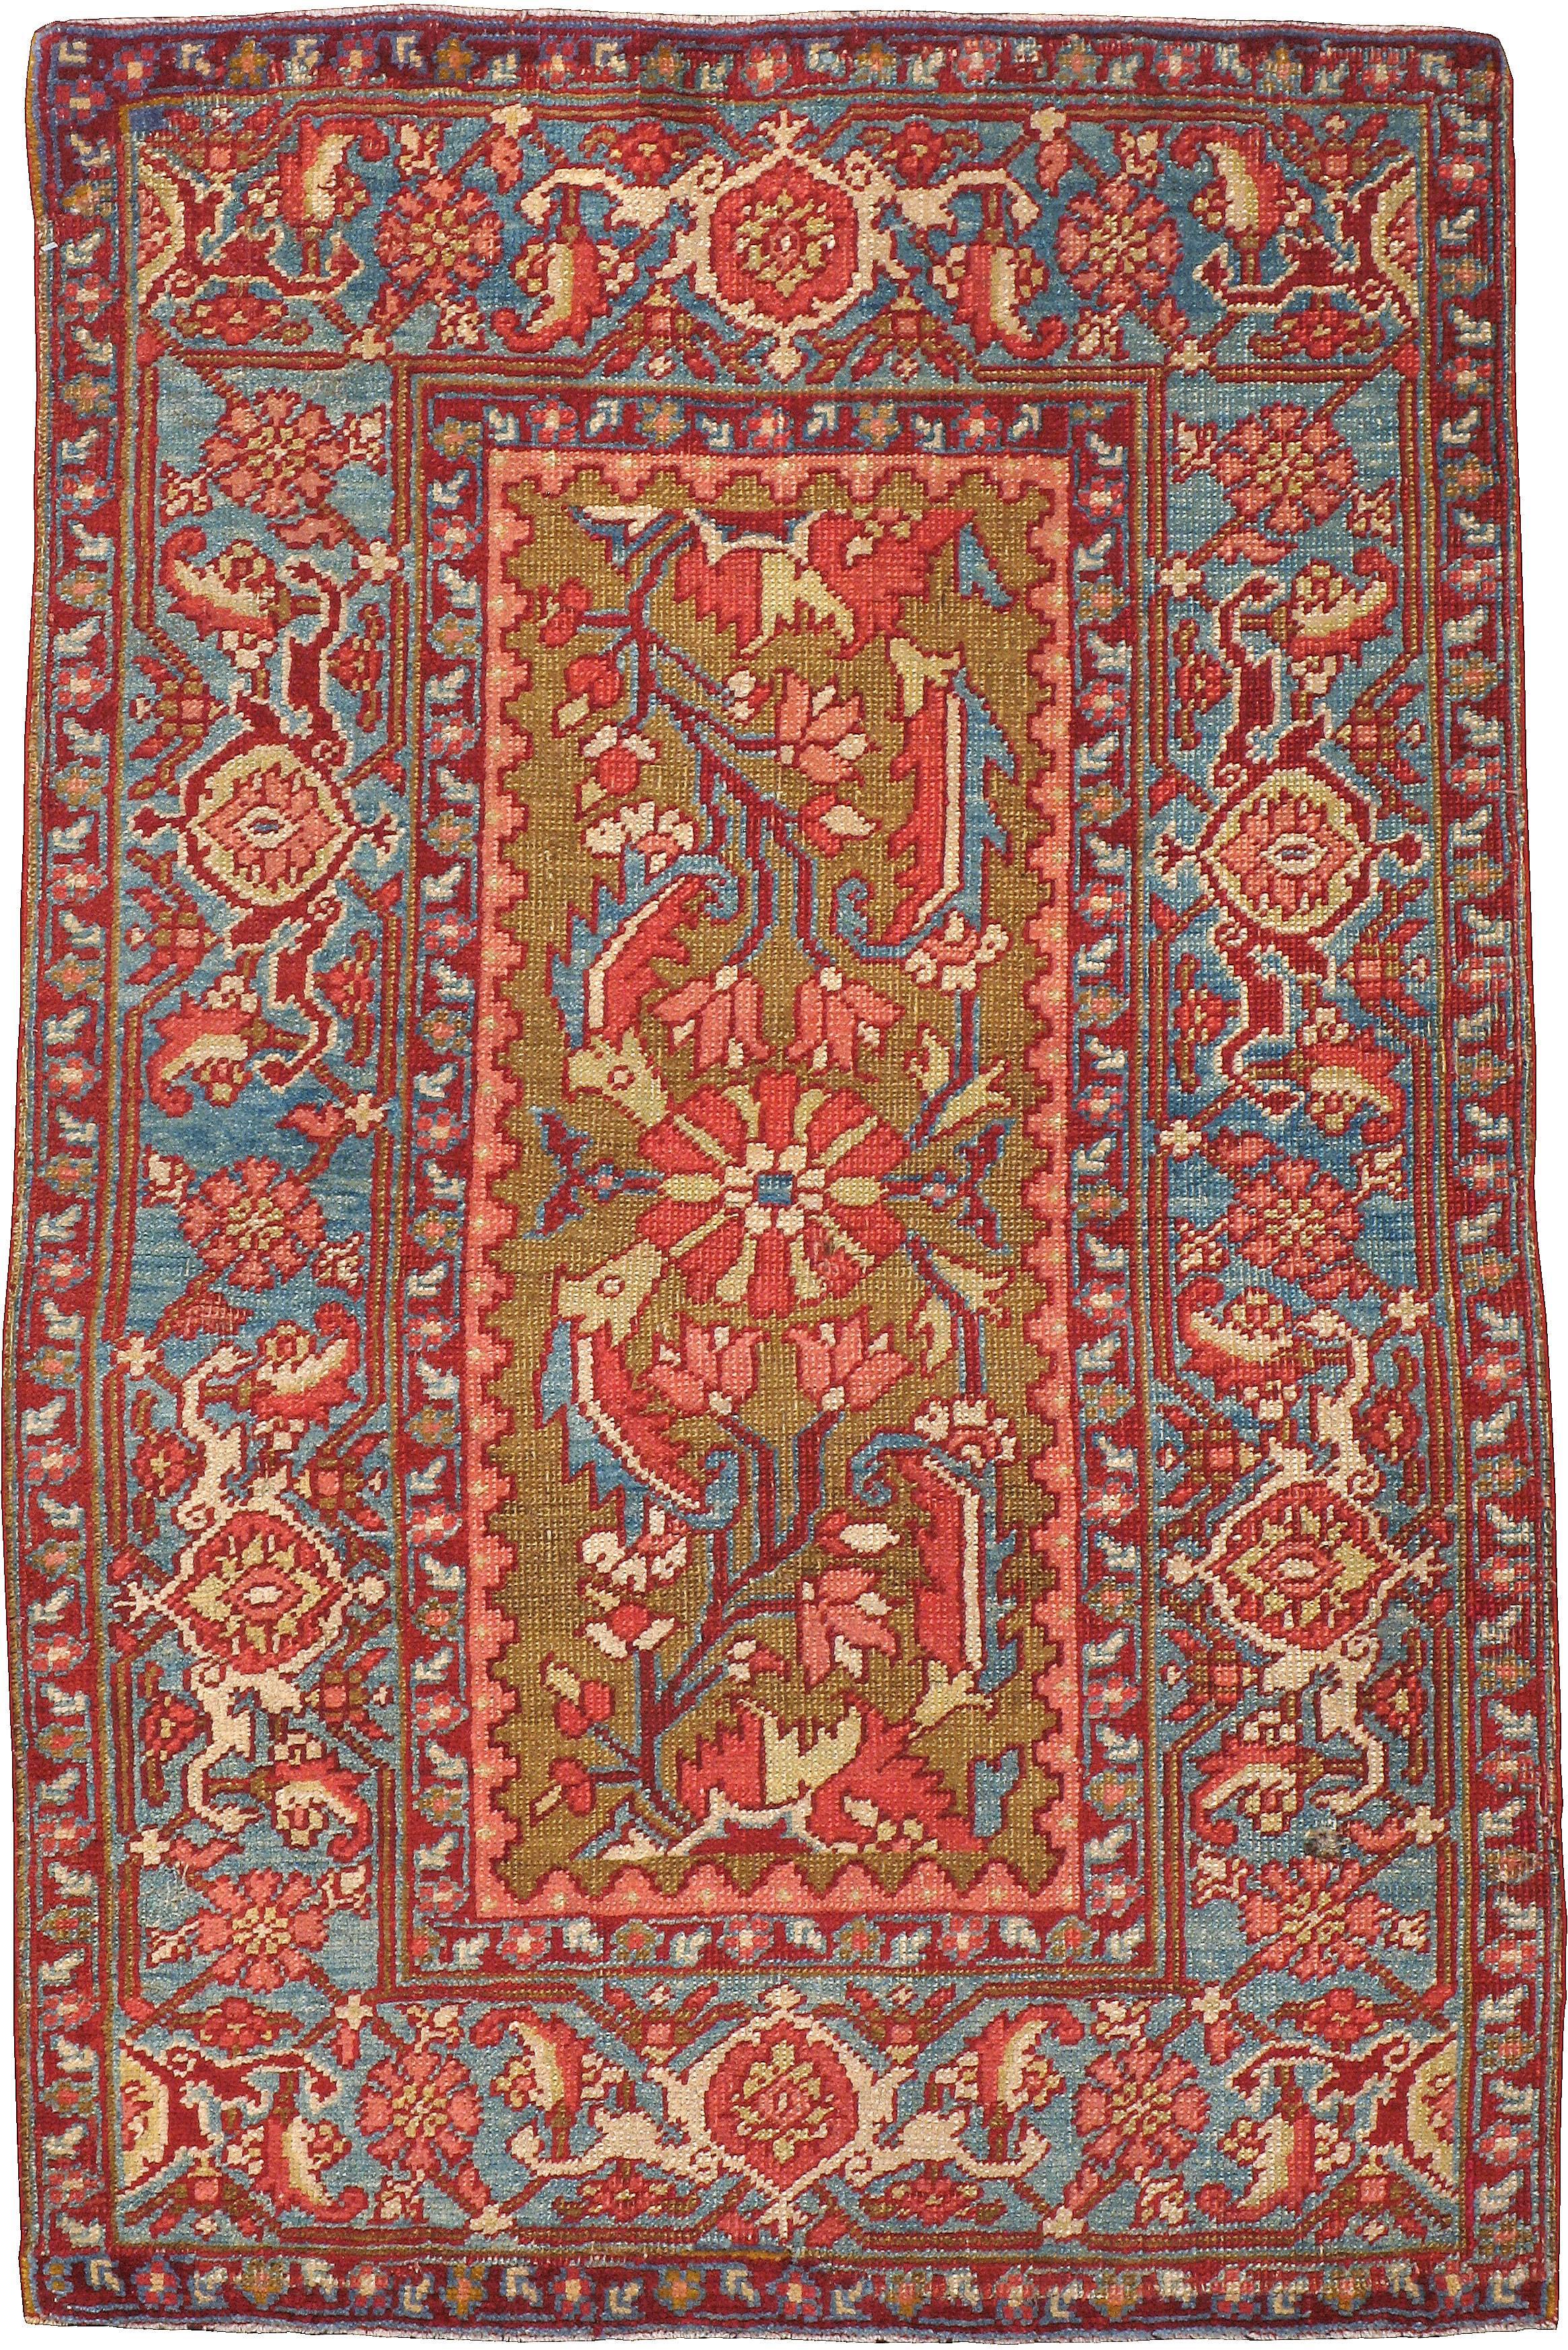 An antique Persian Heriz carpet from the first quarter of the 20th century.